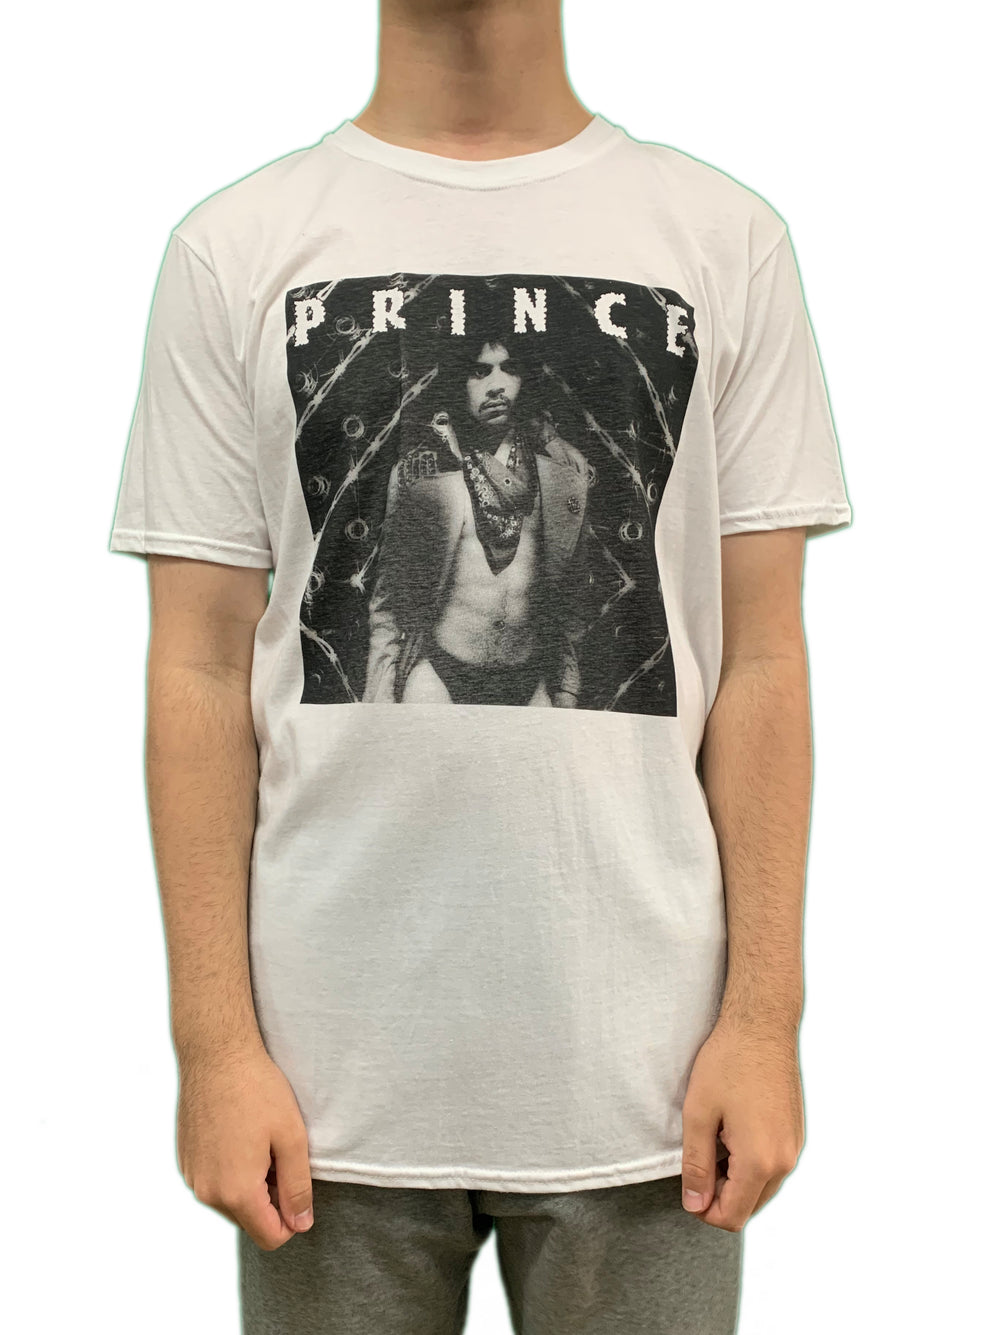 Prince Dirty Mind Album Front Cover Unisex Official T-Shirt Brand New